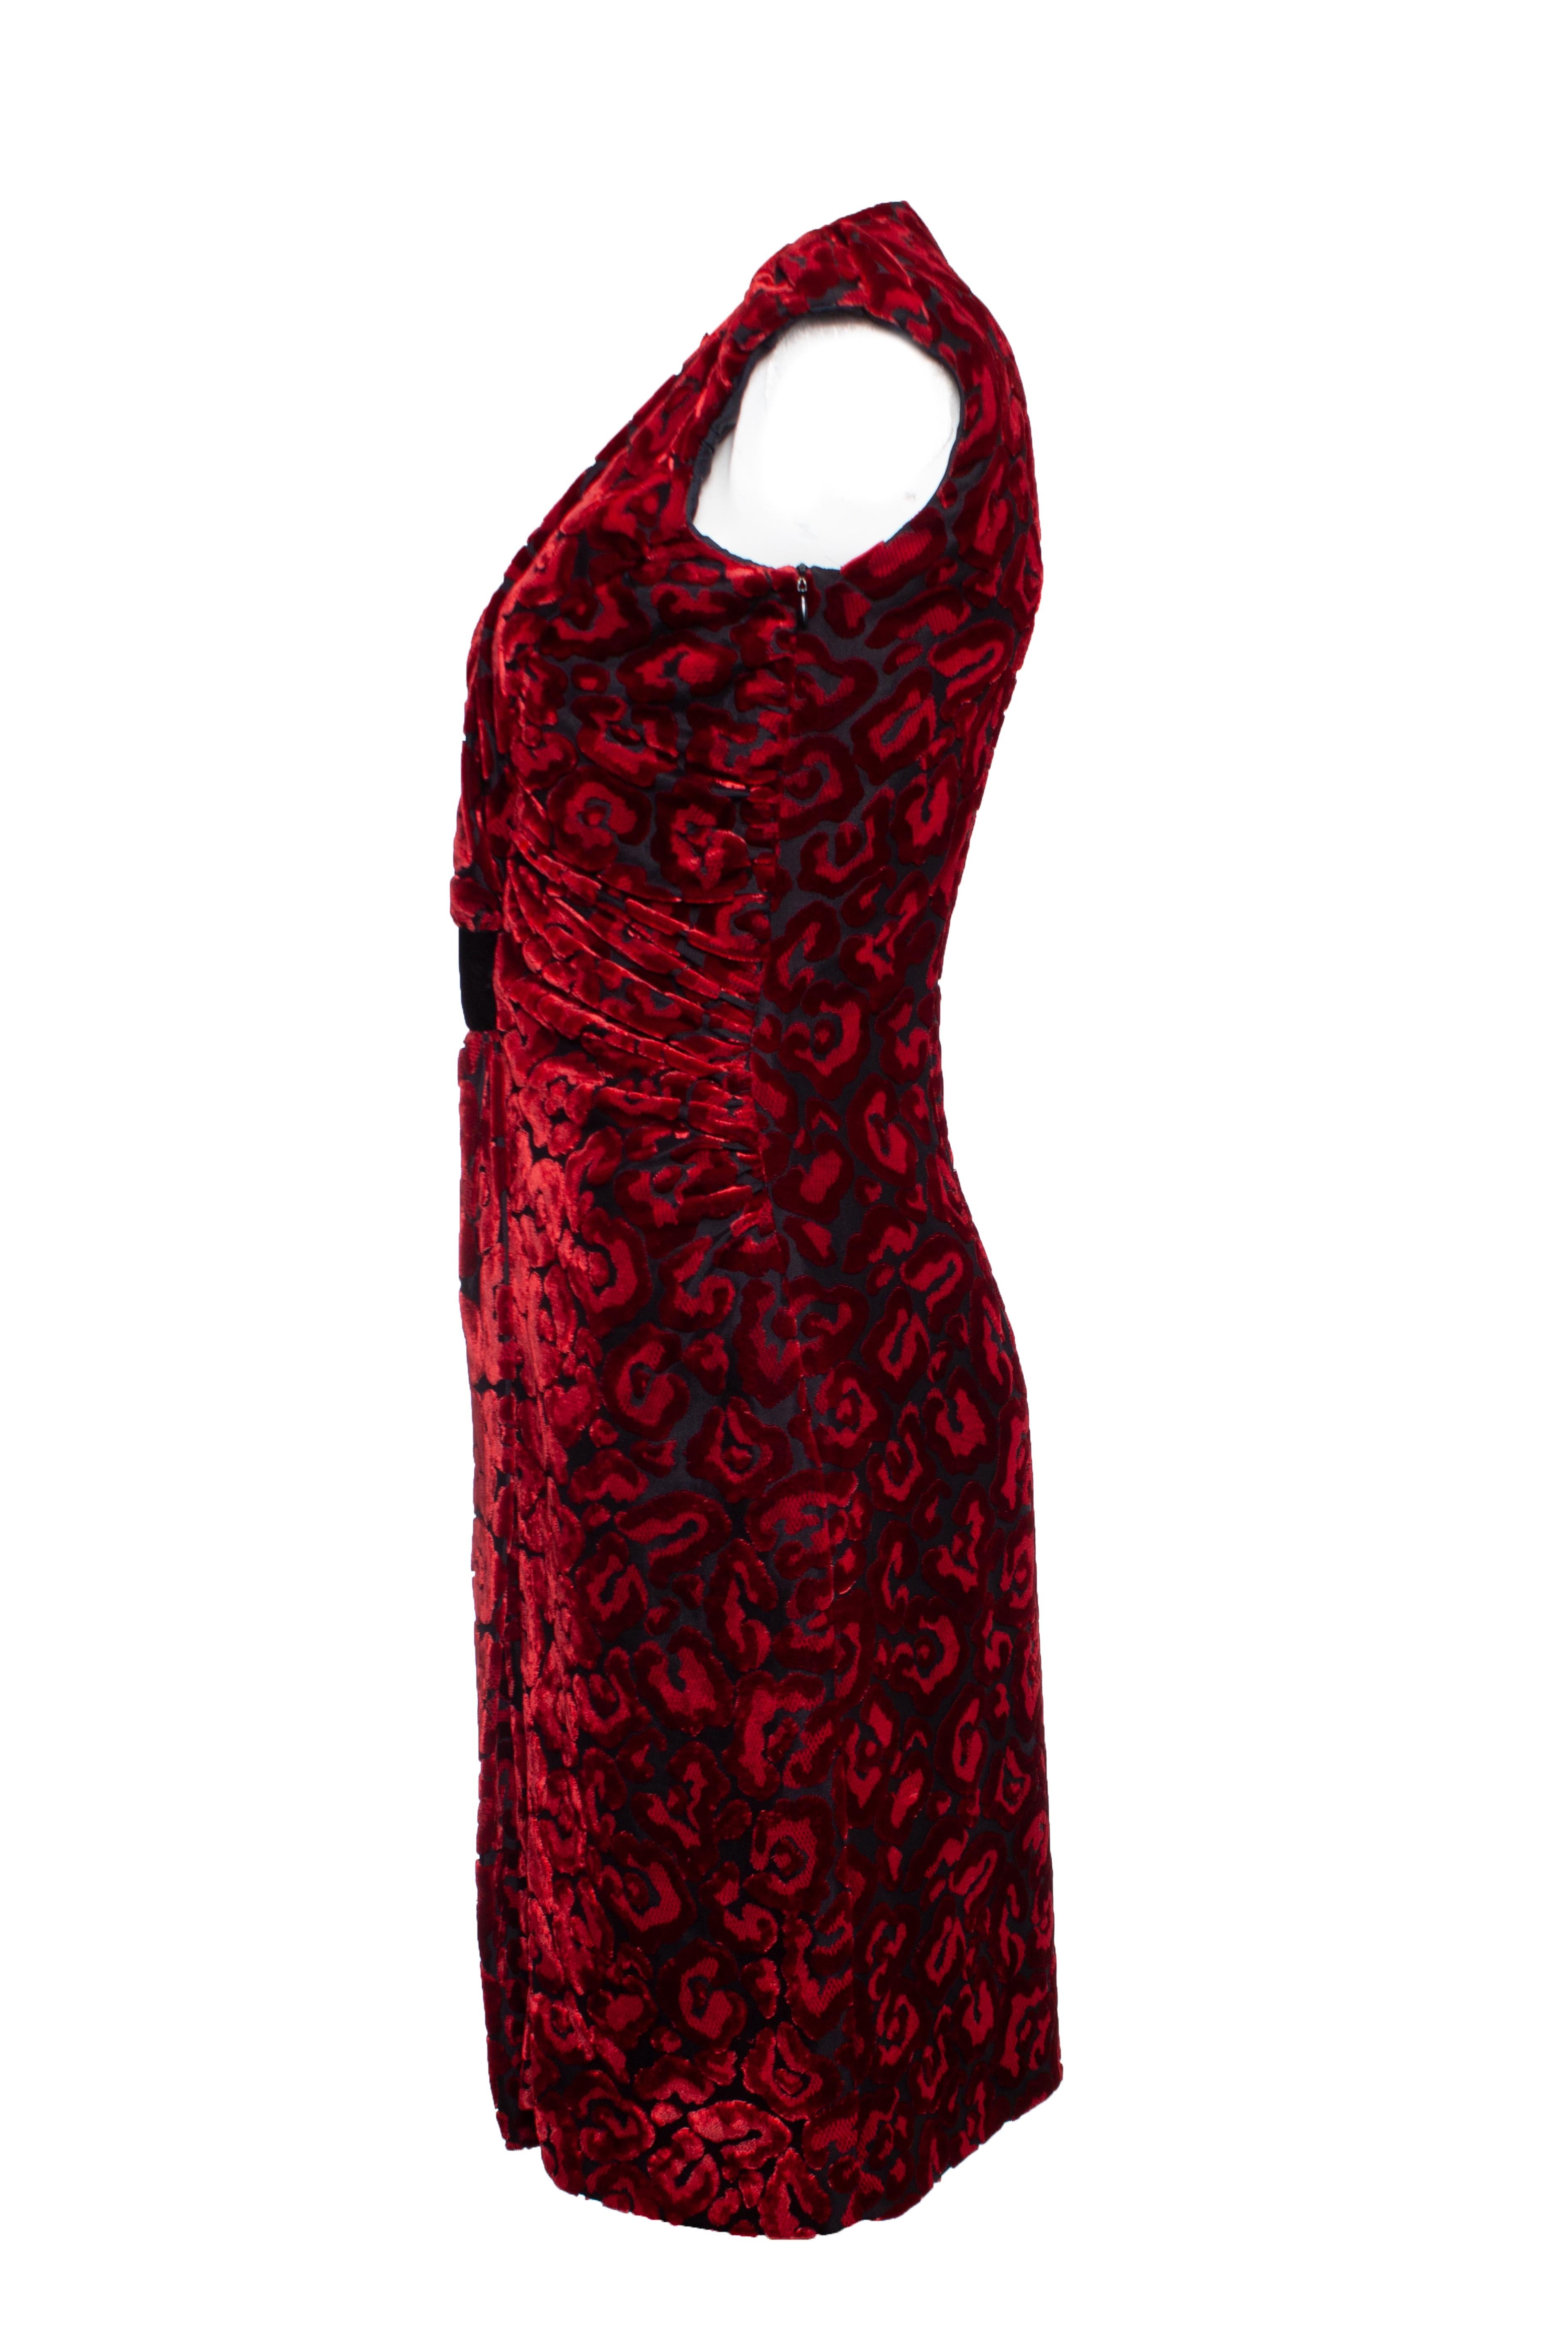 Prada, red velvet dress In Excellent Condition For Sale In AMSTERDAM, NL